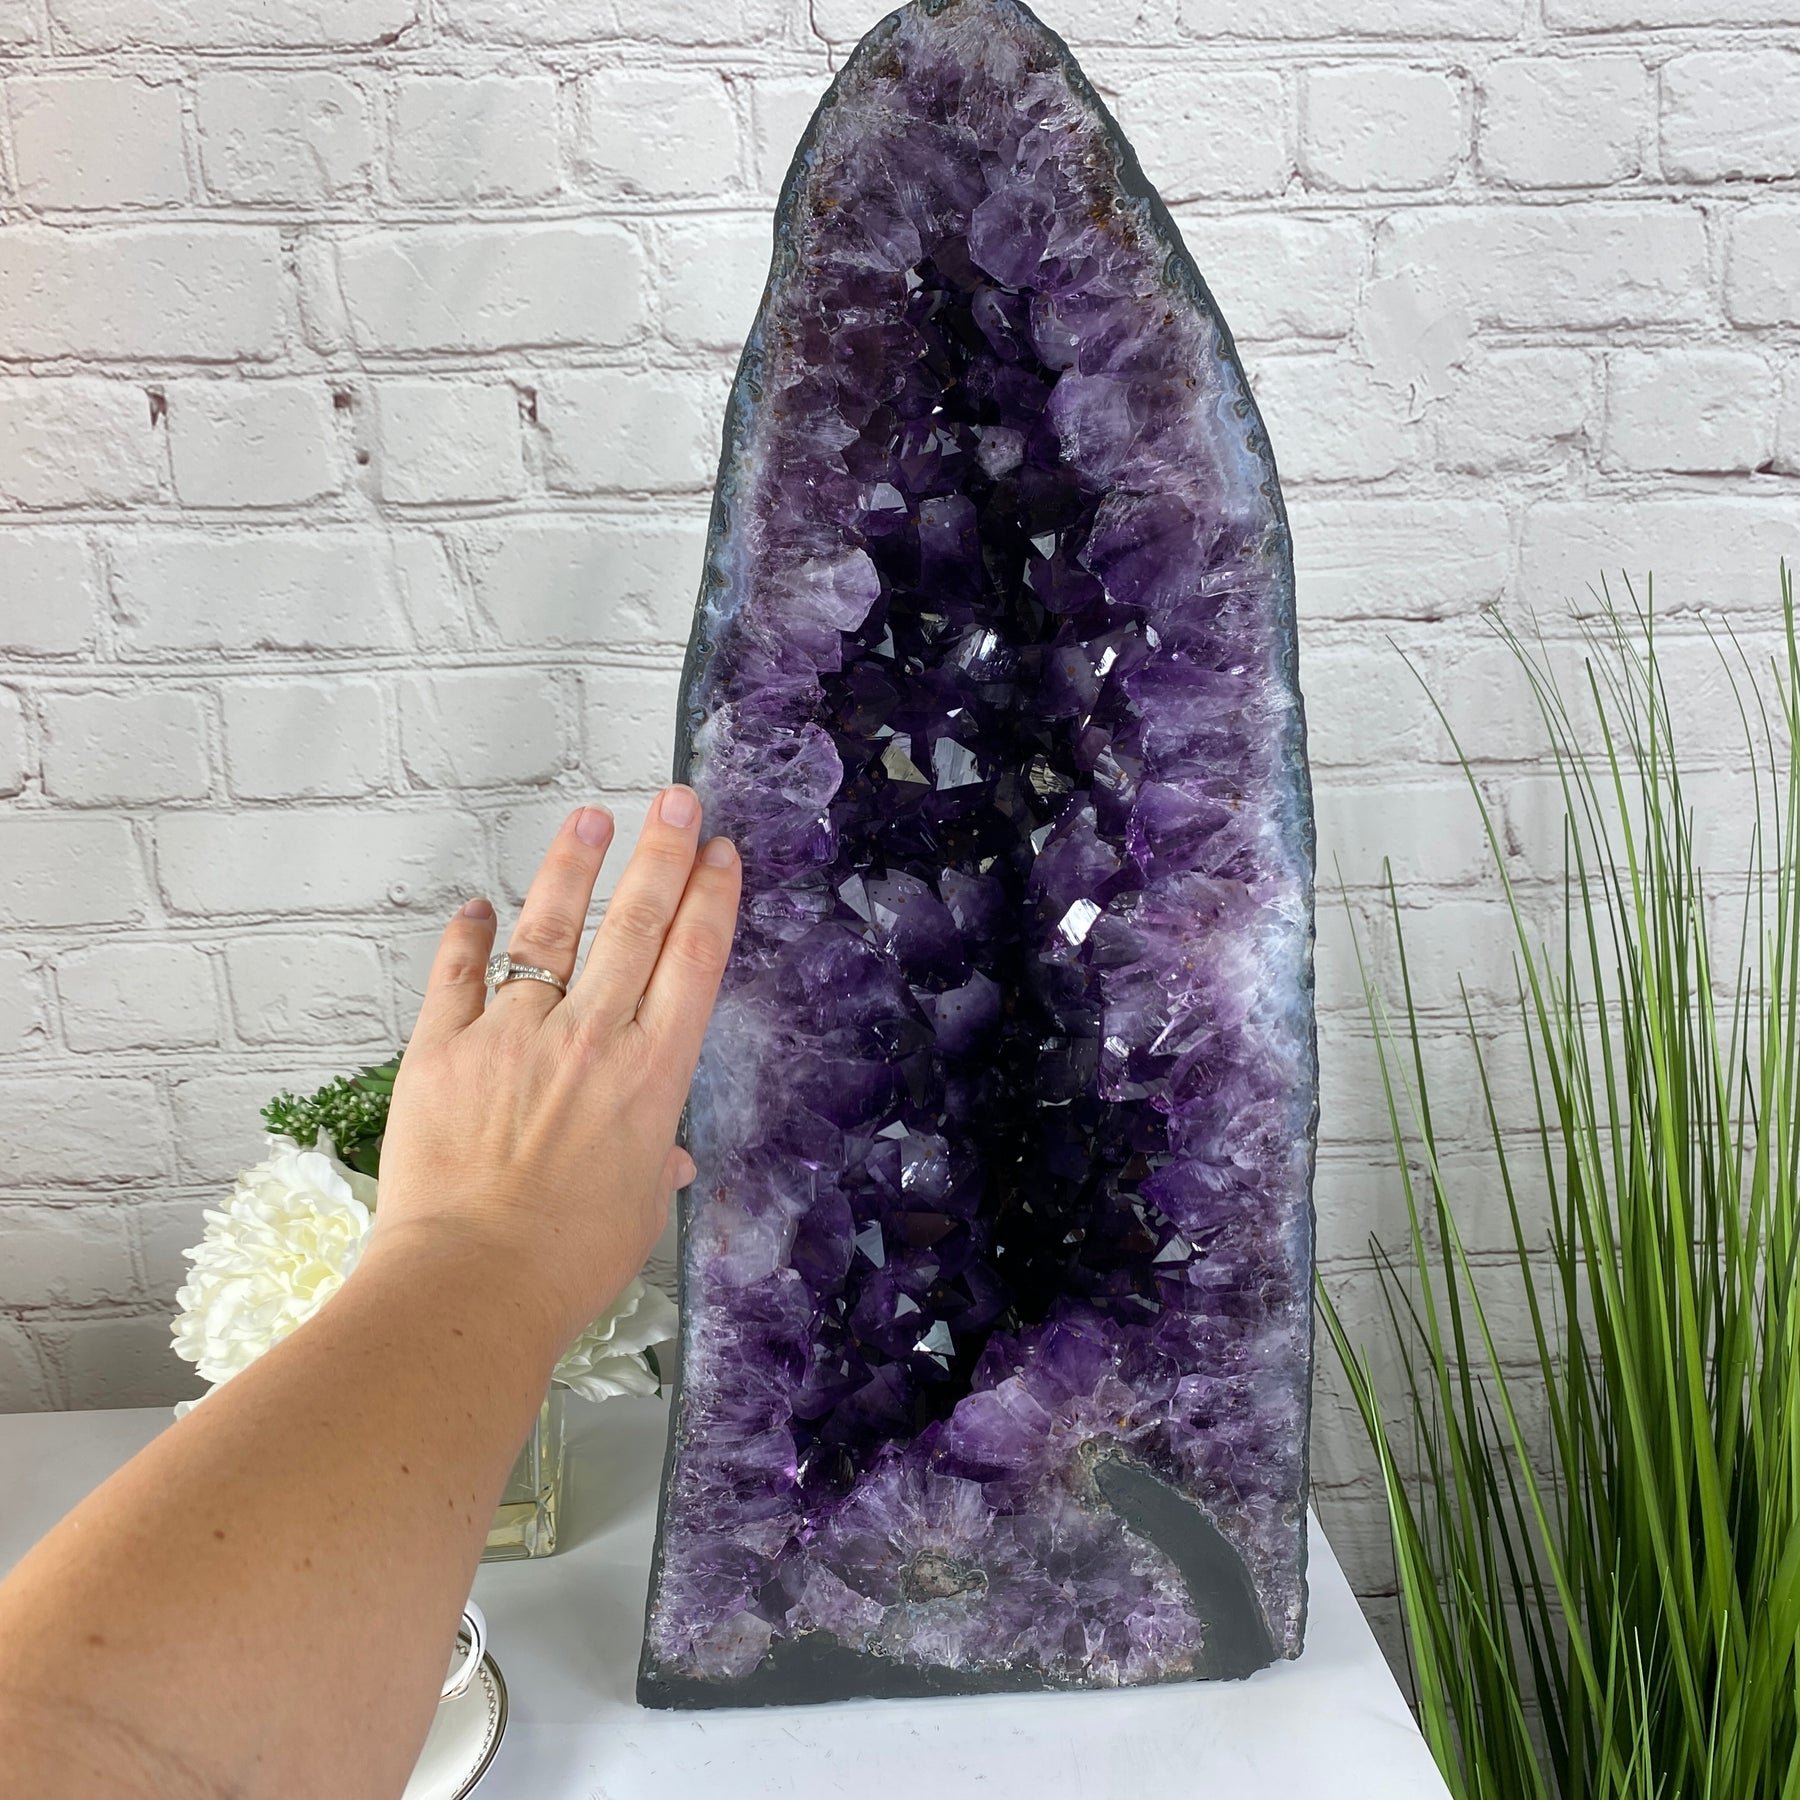 amethyst cathedral appraisal